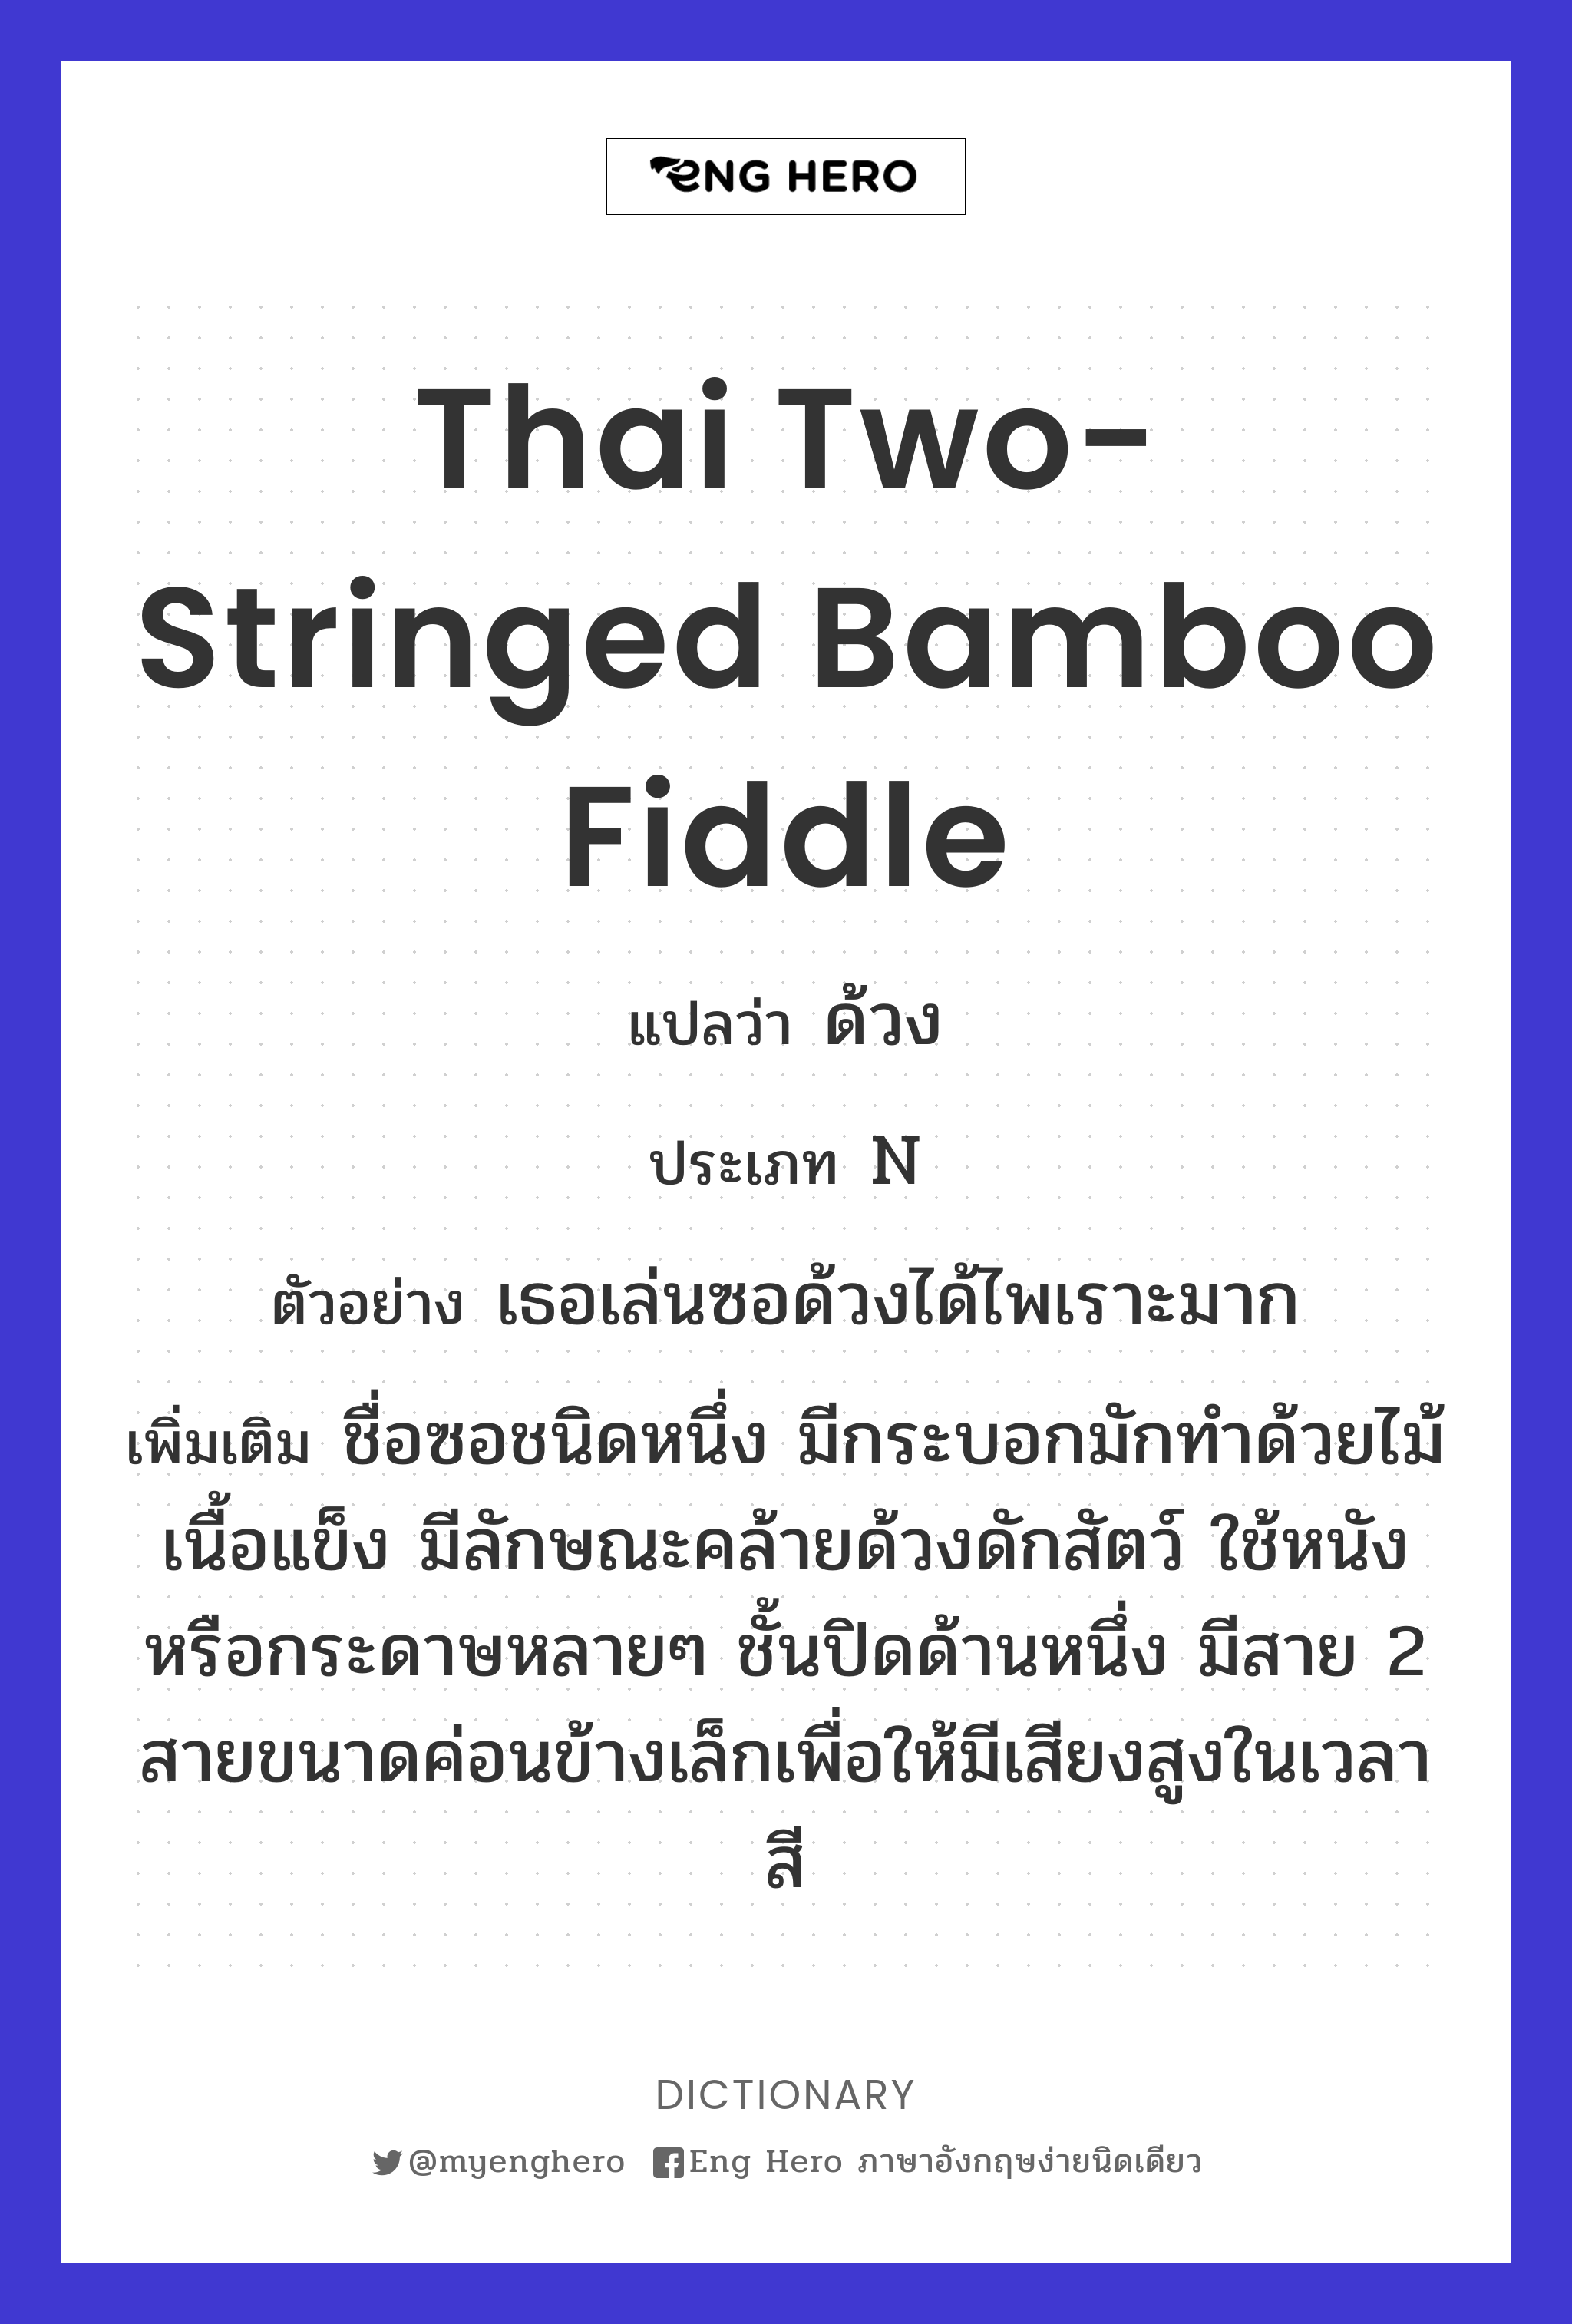 Thai two-stringed bamboo fiddle